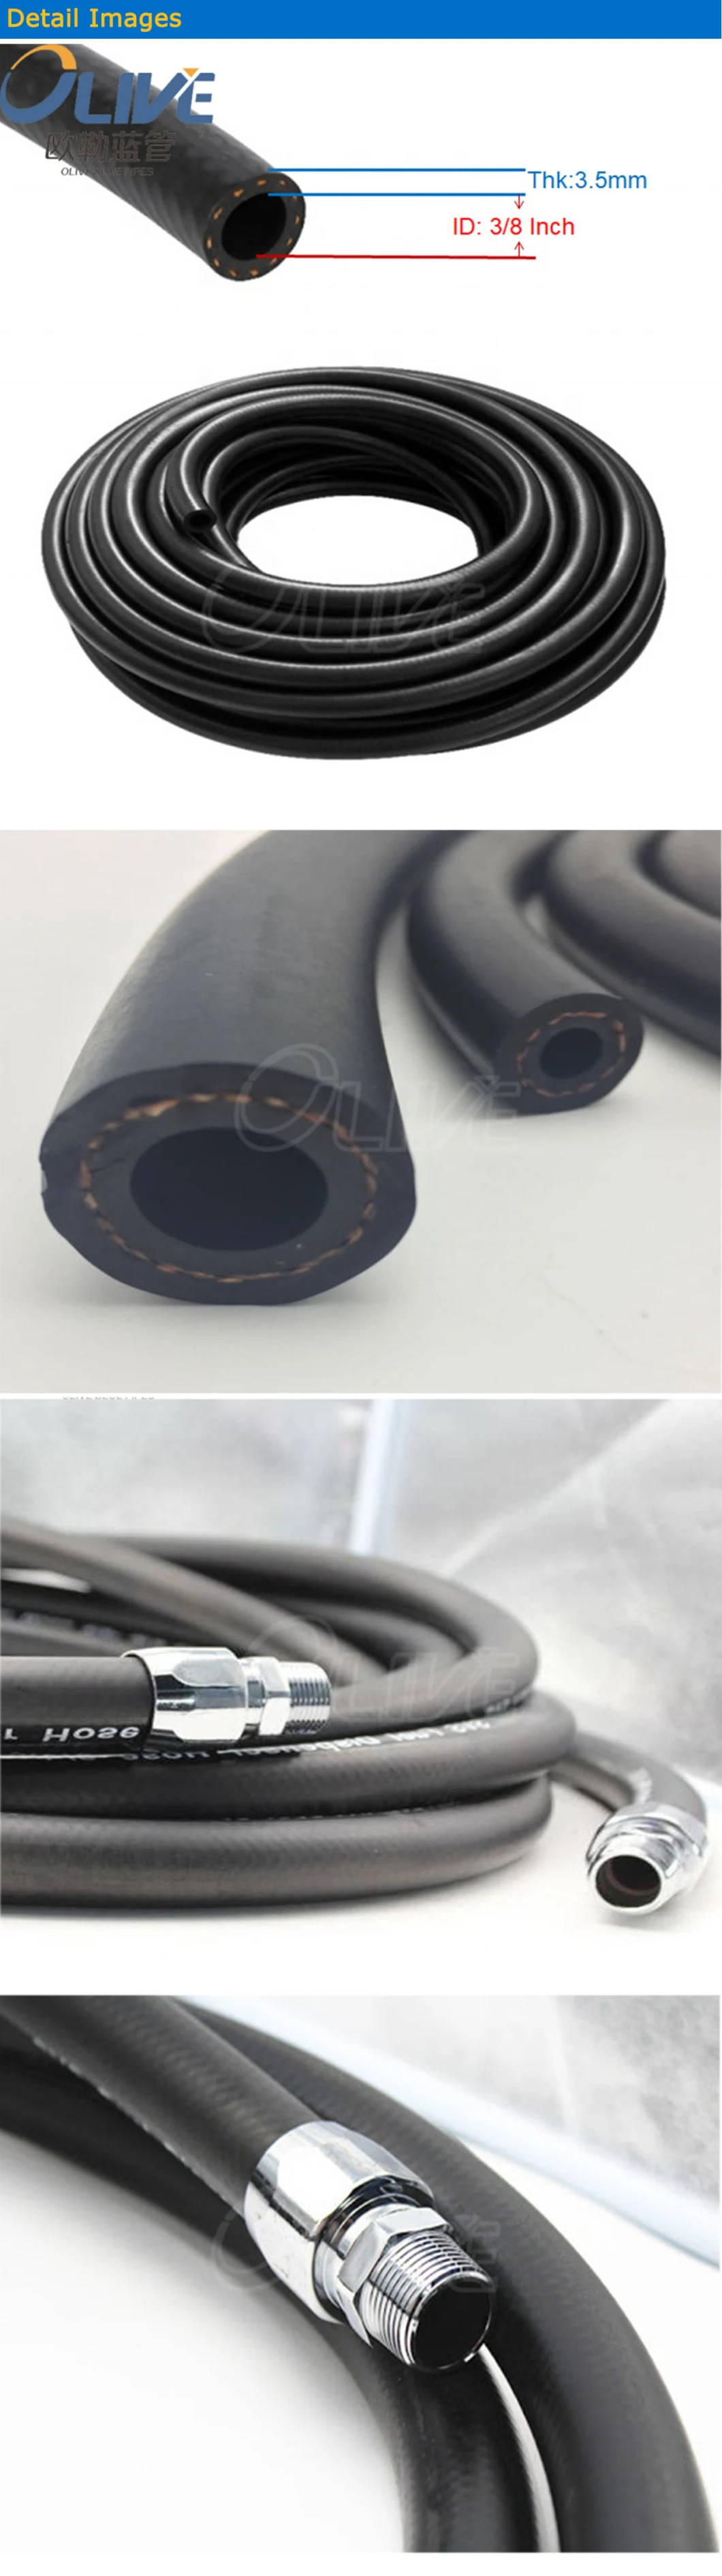 Black SAE 30r7 25mm 50mm Soft Heat Resistant Silicone Rubber Vacuum Water Fuel Breather Hose